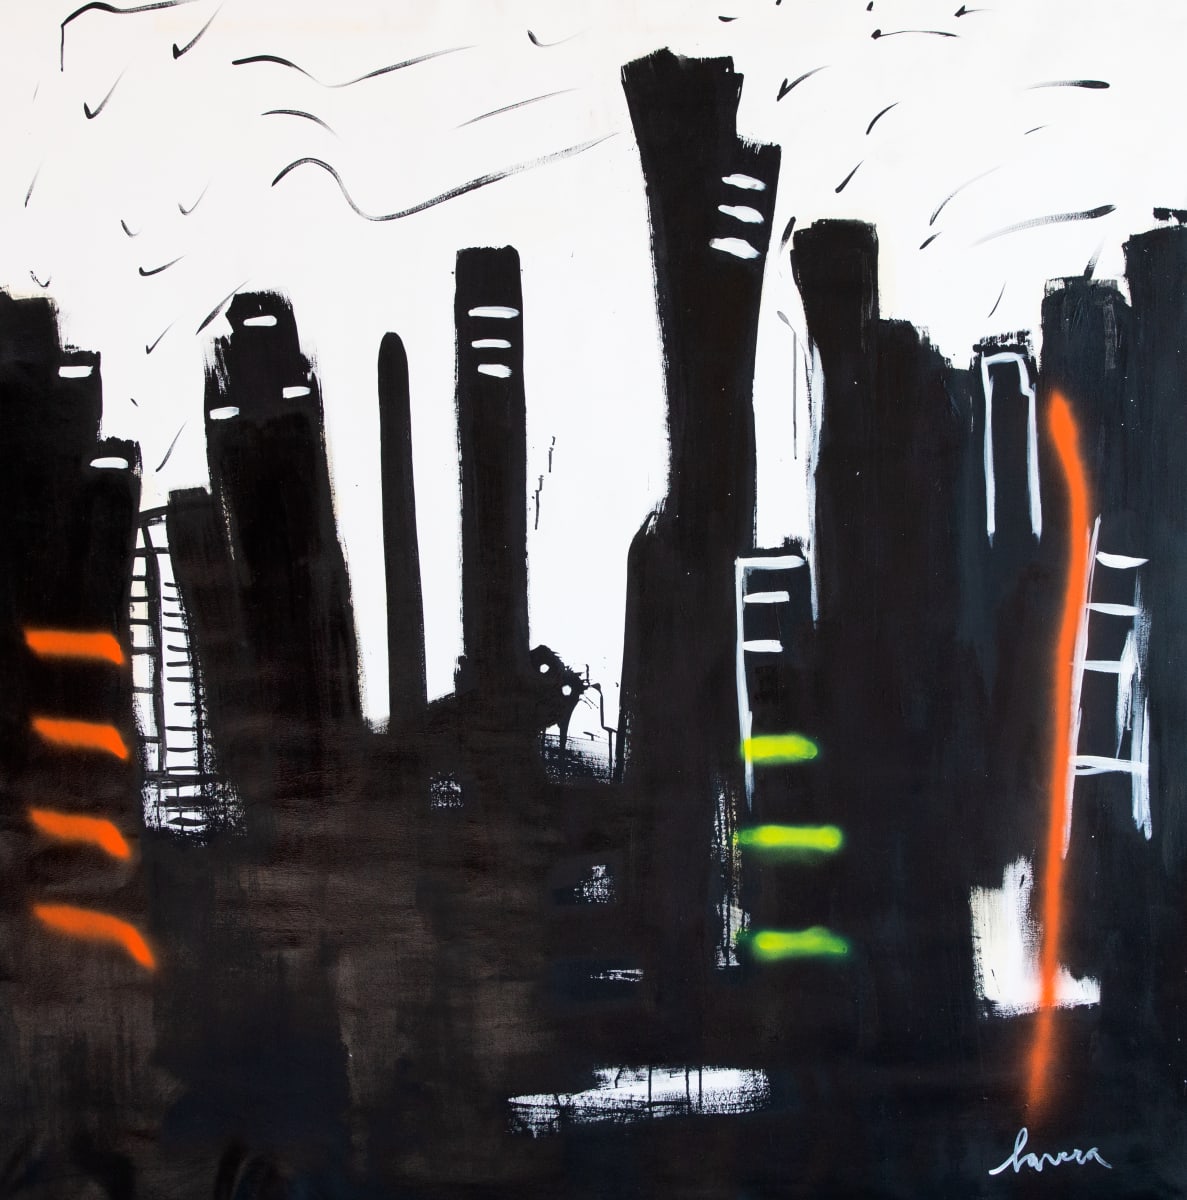 Black City by Fernanda Lavera  Image: It gets dark in the city
I walk inside her
under the gloom

People sleeping on the floor,
people running,
a robbery happens.

Black City,
yours, mine, ours.

In my imagination, thick brushstrokes black as night, resemble crooked buildings, like our minds.